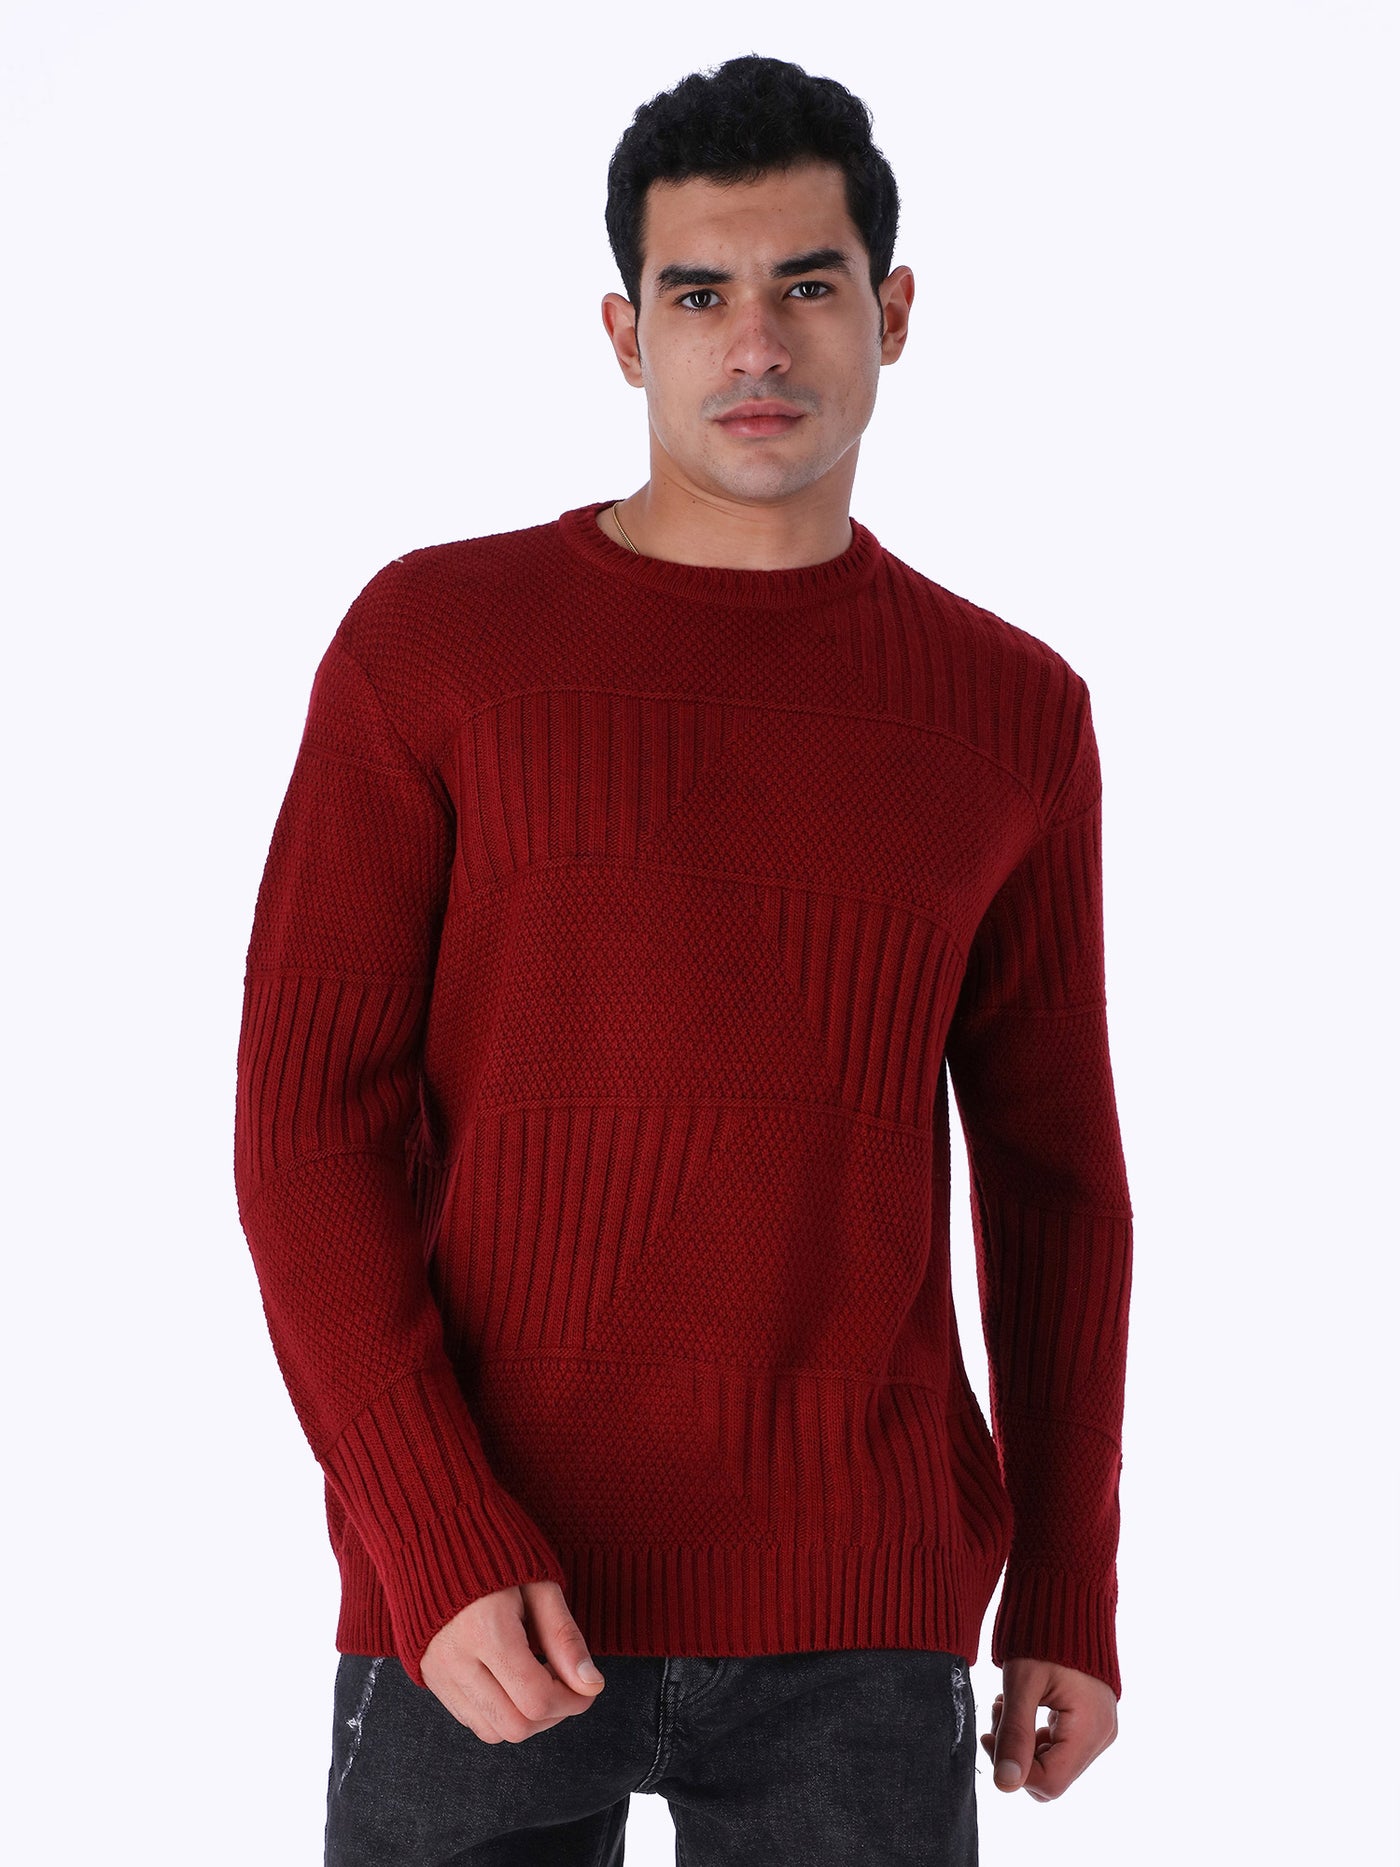 OR Mens Textured Crew Neck Sweater